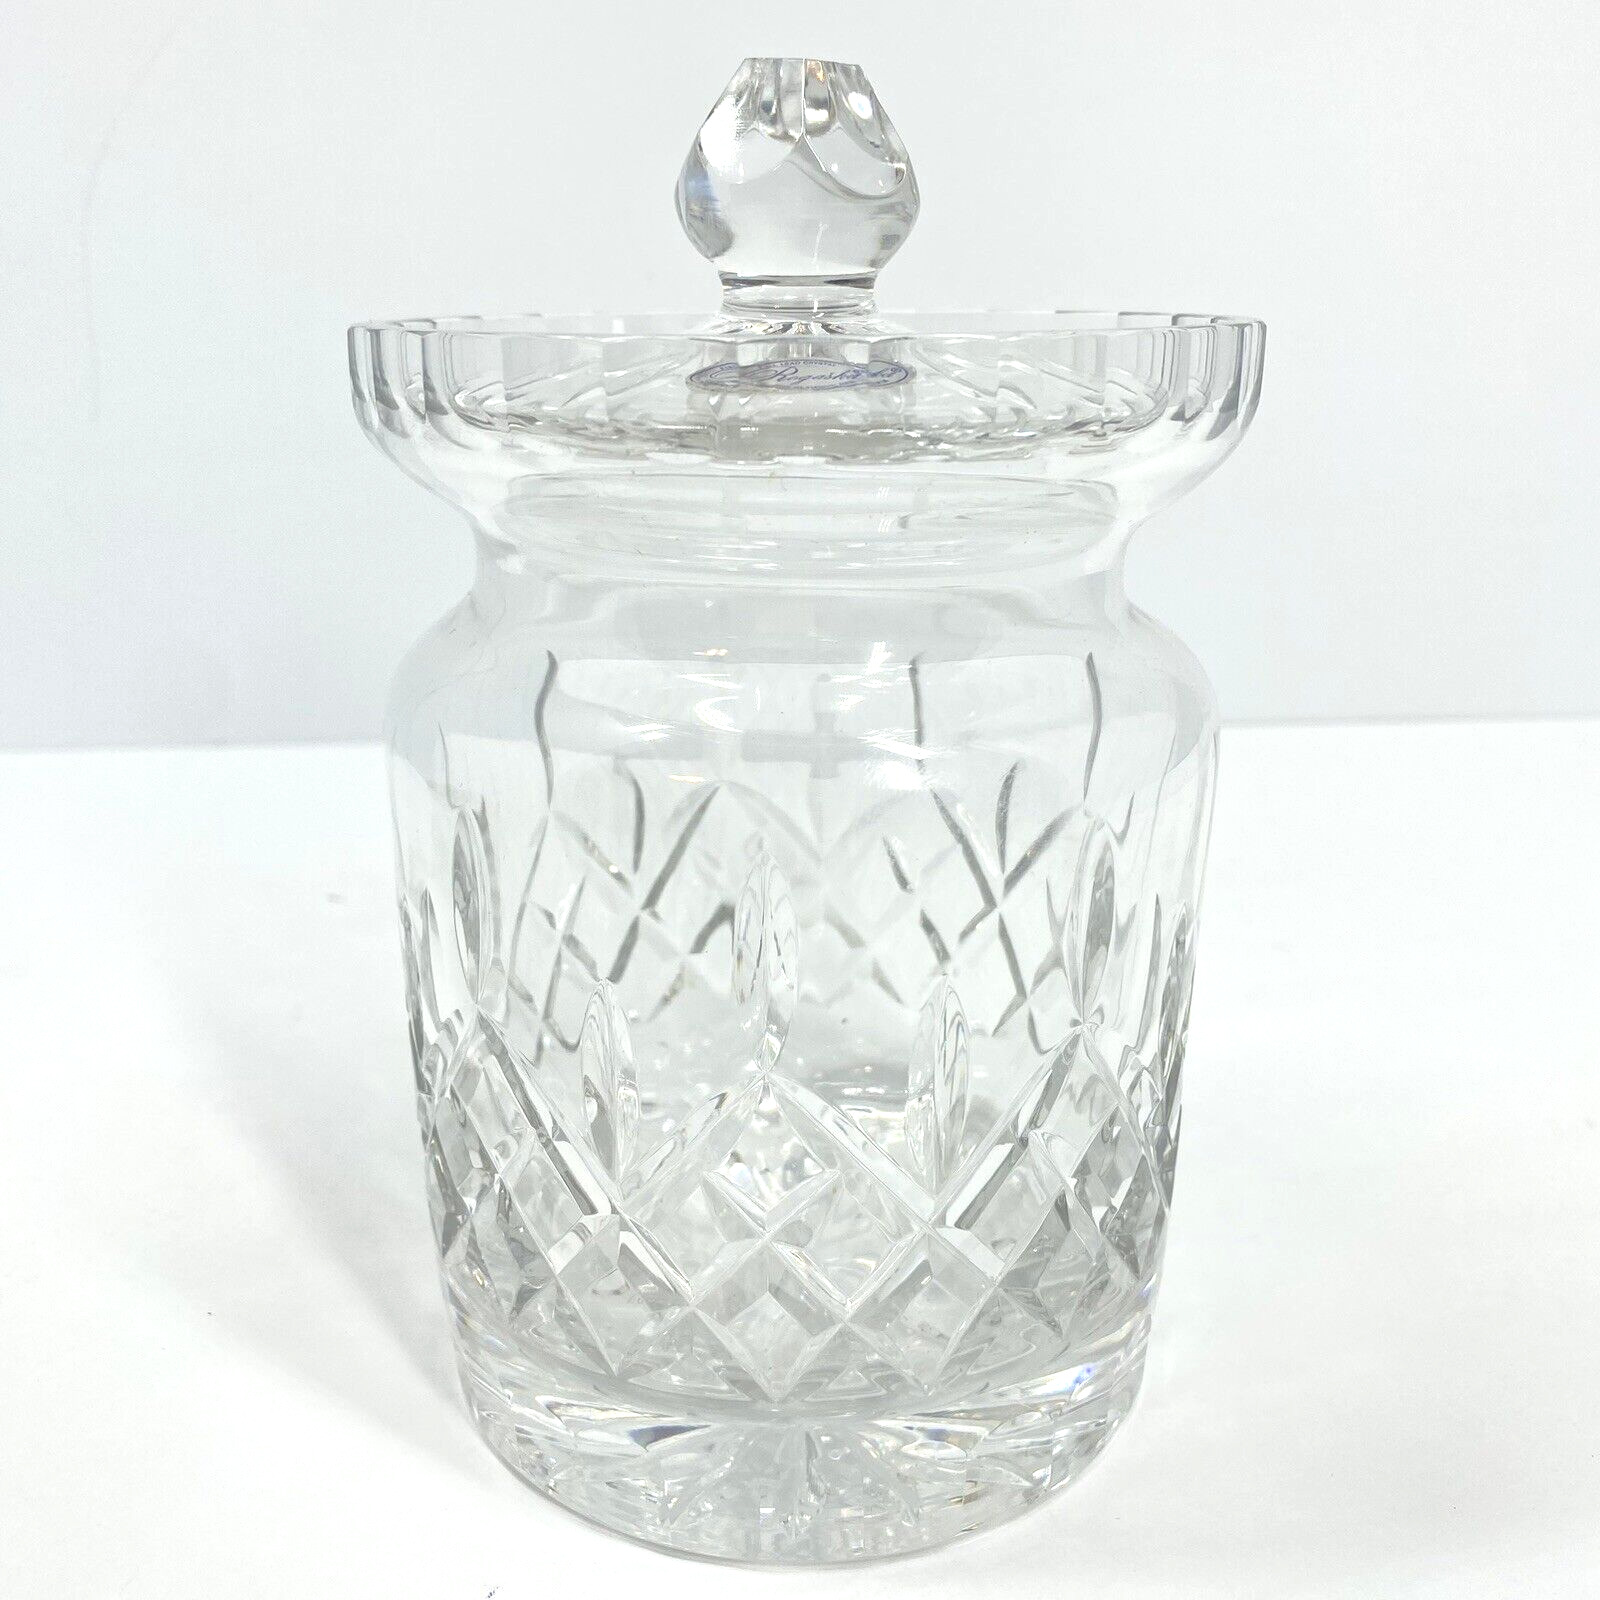 CRYSTAL Jar with Lid Rogaska Biscuit Barrel Canister with Lid BEAUTIFUL